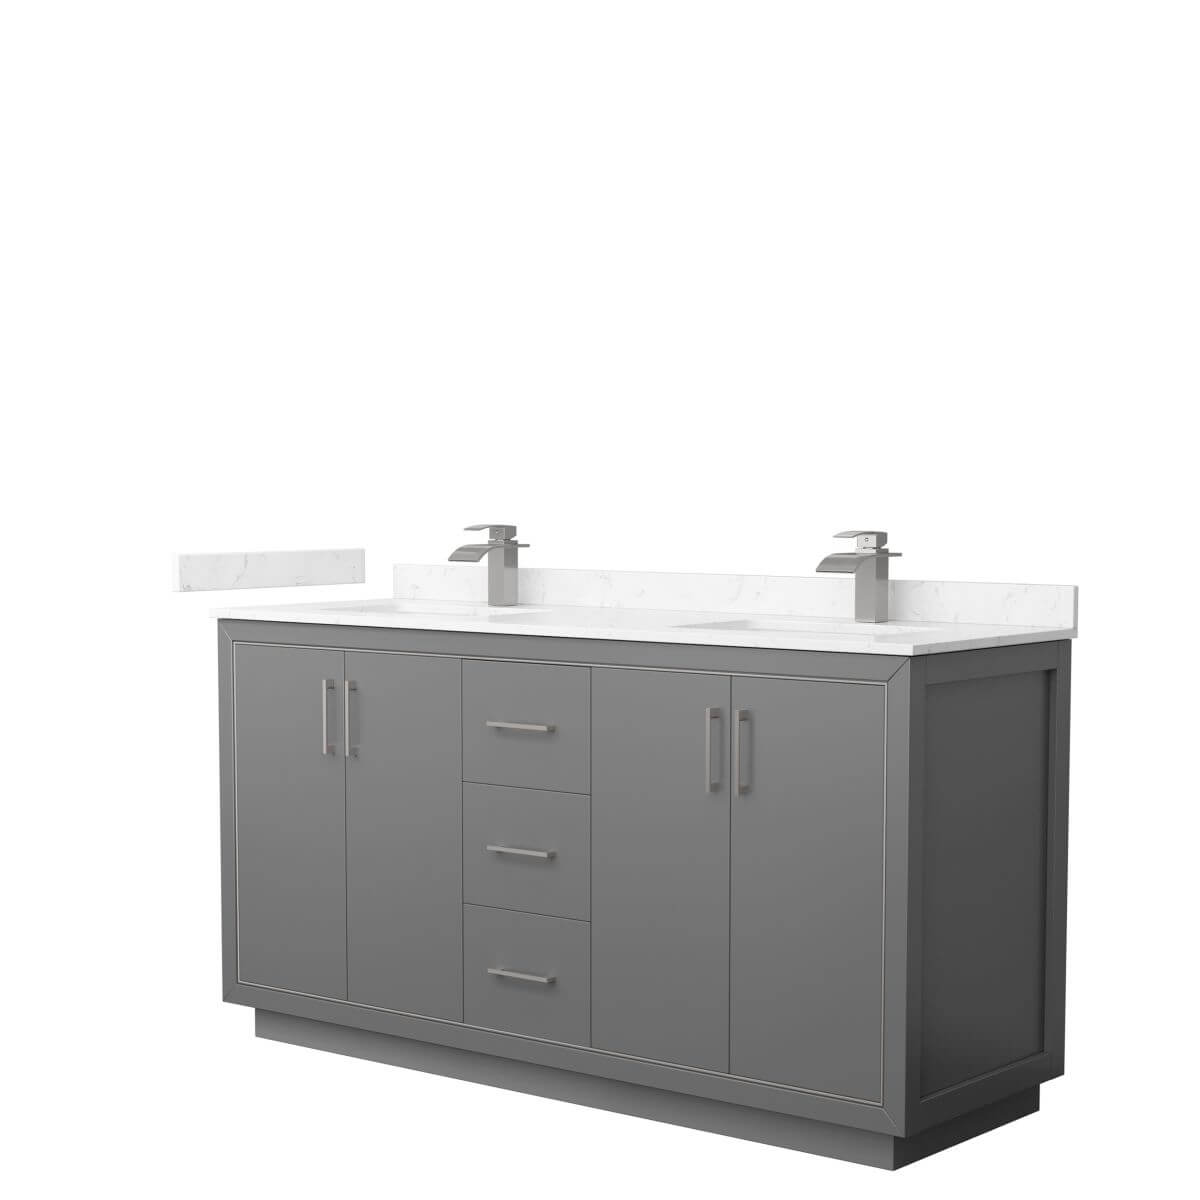 Wyndham Collection WCF111166DKGC2UNSMXX Icon 66 inch Double Bathroom Vanity in Dark Gray with Carrara Cultured Marble Countertop, Undermount Square Sinks and Brushed Nickel Trim